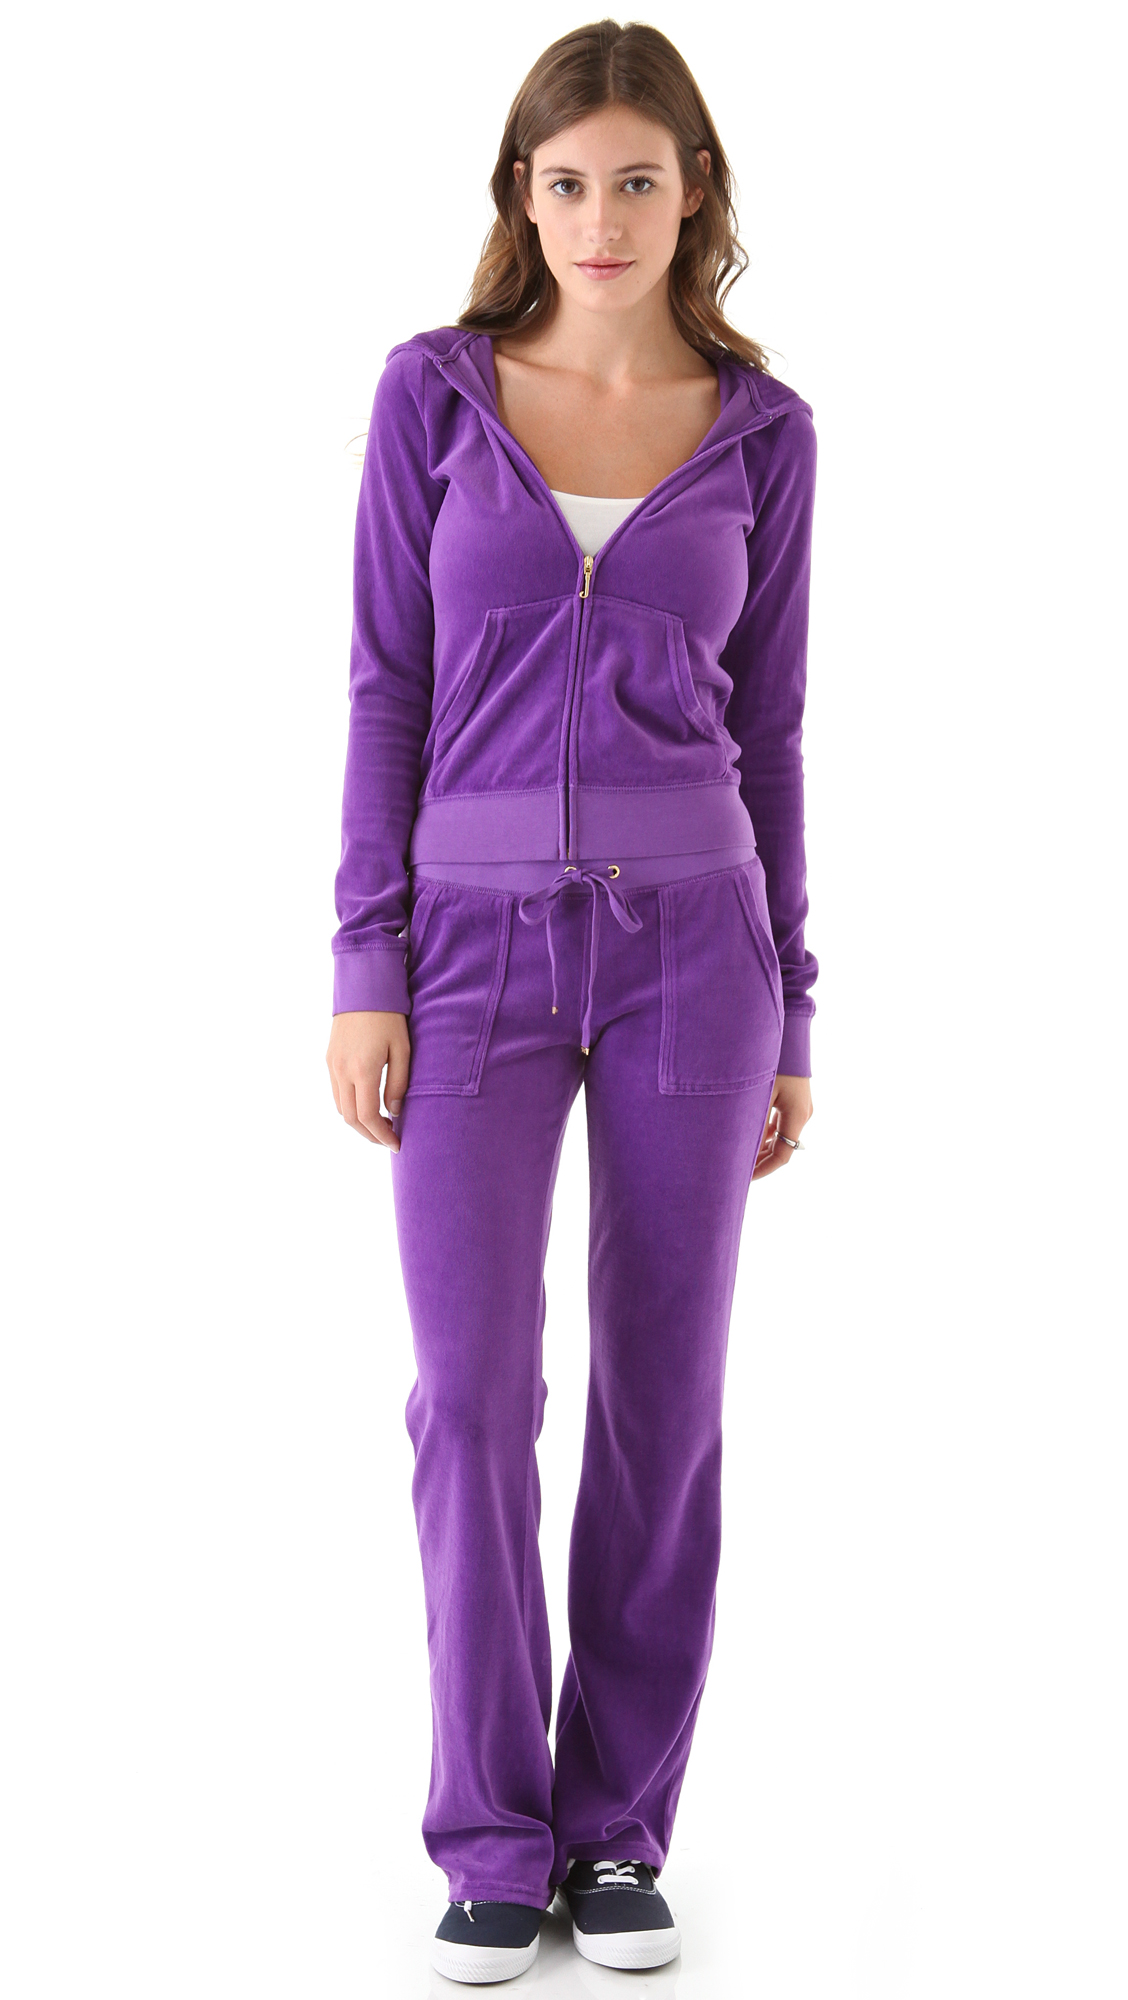 Juicy Couture Exclusive Embossed Set Velour Purple Flare Track Pants and Top